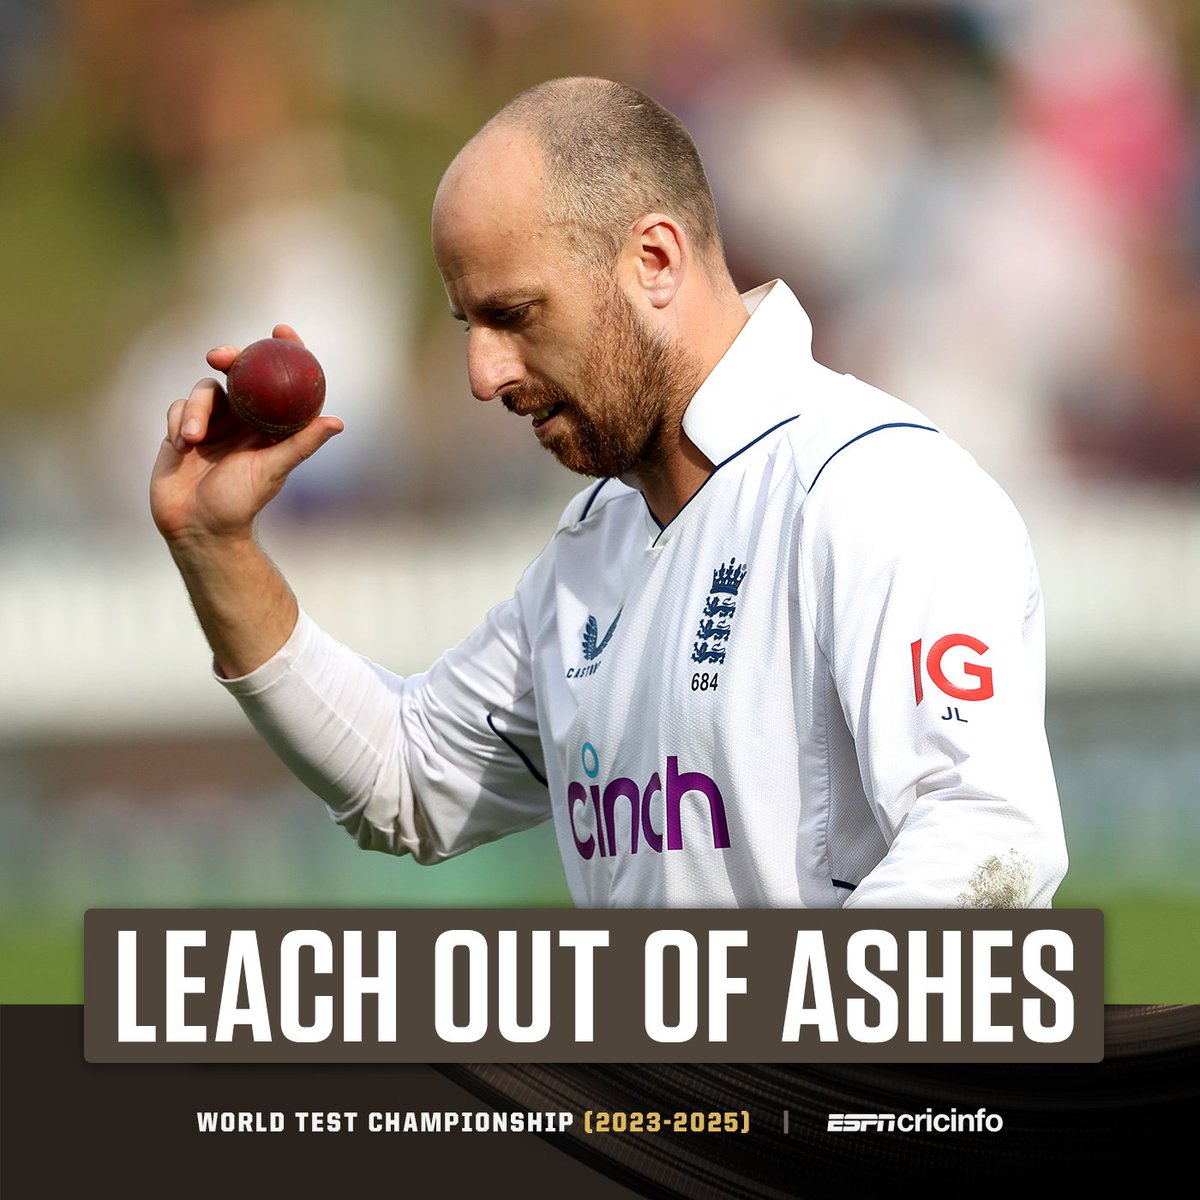 A stress fracture of the lower back will keep Jack Leach out of the #Ashes 🤕

A scan revealed this after the left-arm-spinner developed symptoms during the Ireland Test